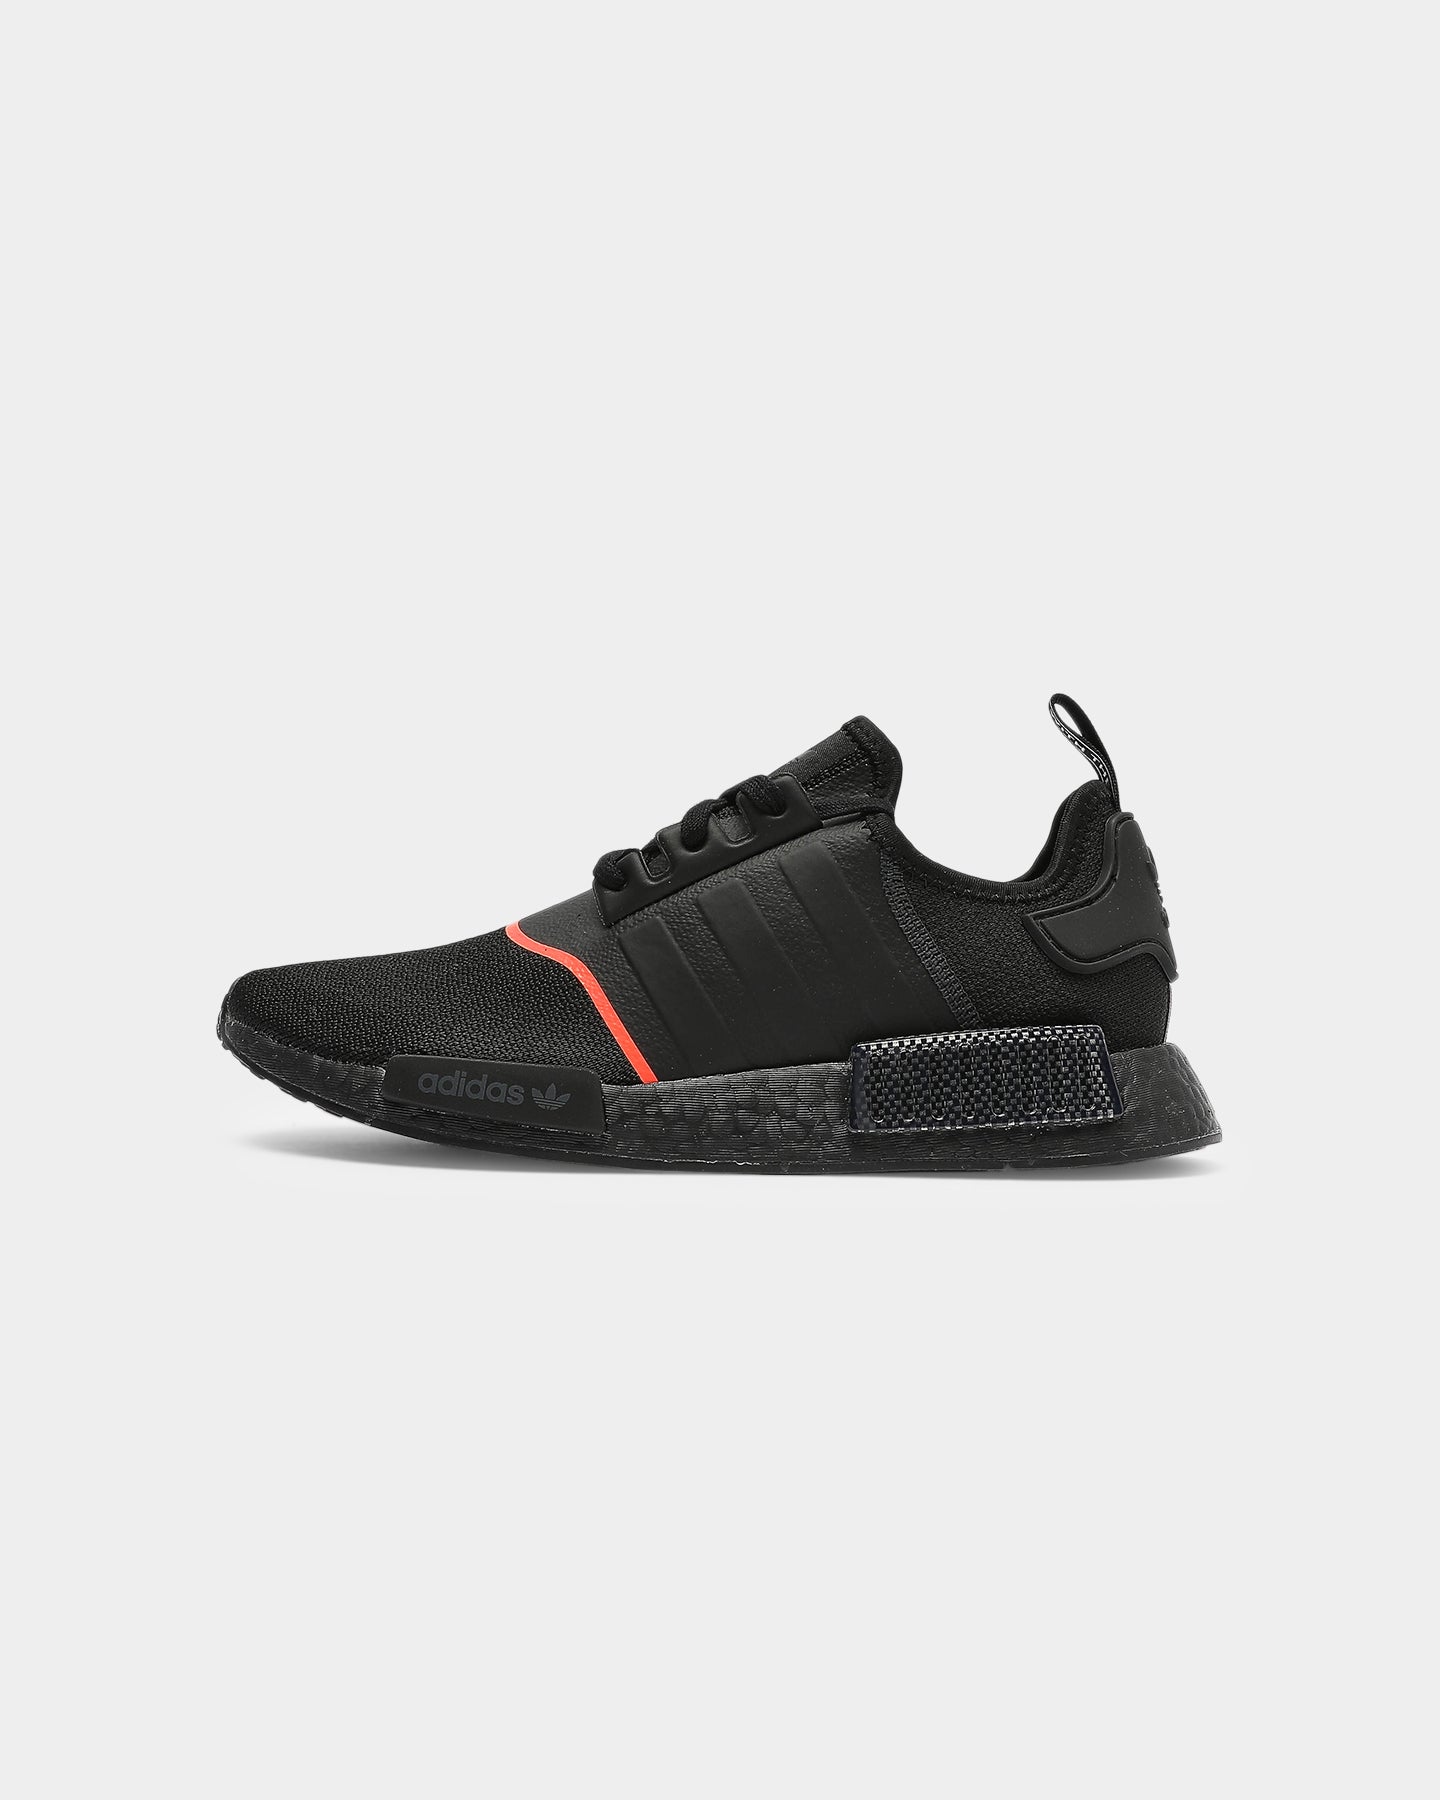 adidas nmd all black with red